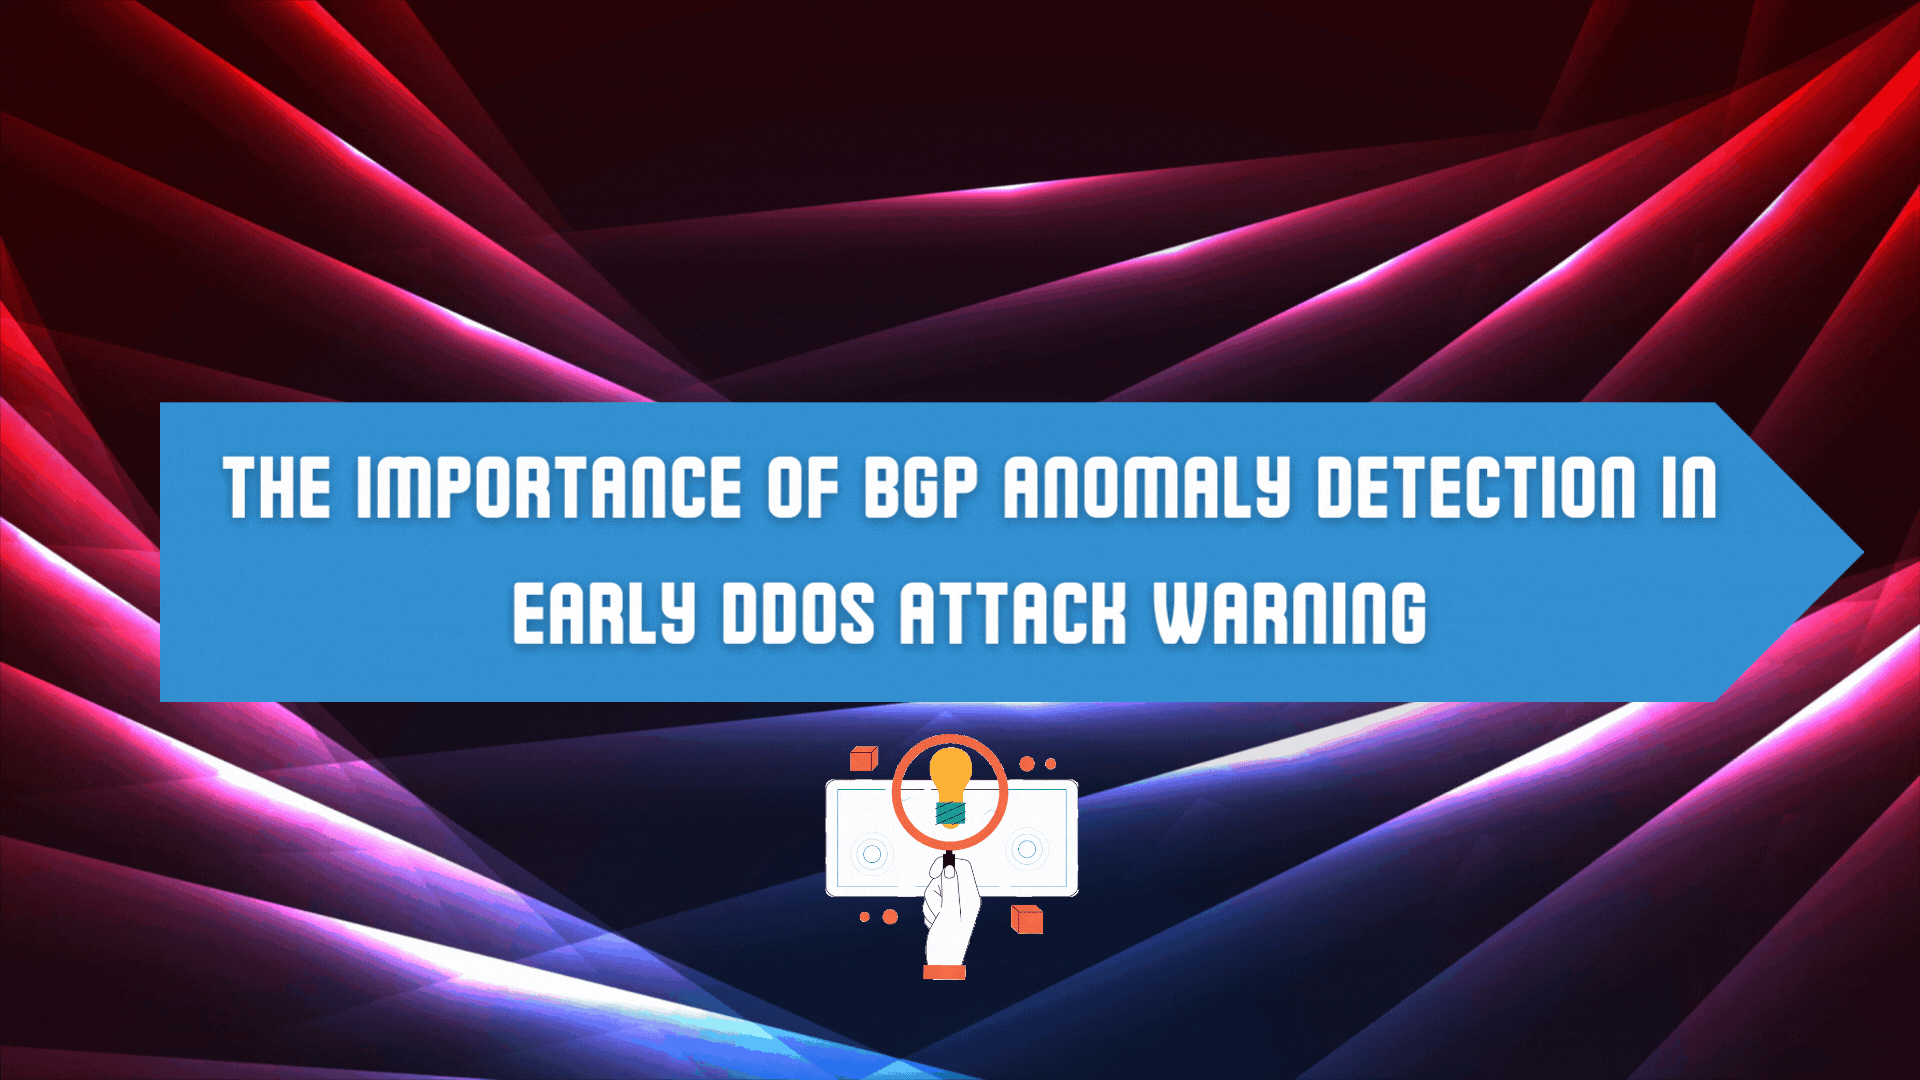 The Importance of BGP Anomaly Detection in Early DDoS Attack Warning